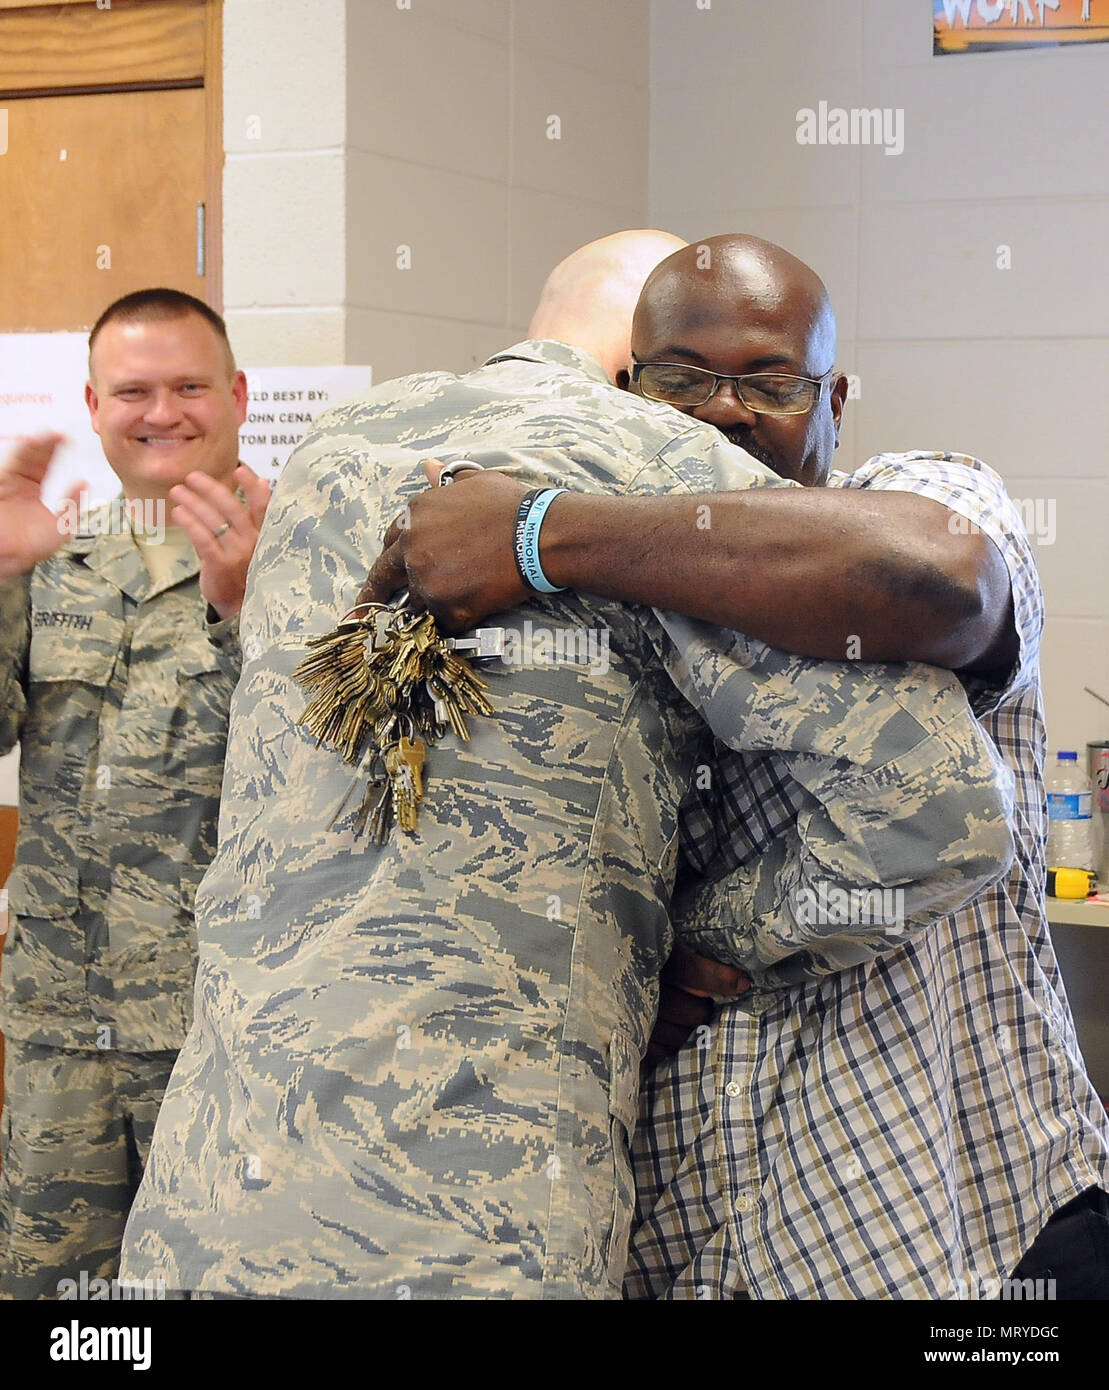 Chief Master Sgt. Ronald C. Anderson, Command Chief Master Sergeant of the Air National Guard, visits Tangipahoa Parish and hugs Mr. Allen Moore Jr., a custodian for the Amite High school on July 15, 2017. The site visit showcased the Louisiana Care Innovative Readiness Training mission here in Eastern Louisiana. The Innovative Readiness Training mission showcases a multi-service and interagency expeditionary readiness training event, which provides medical, dental and optometry care at no cost to the community and surrounding areas. (U.S. Air National Guard photo by Master Sgt. Paula Aragon) Stock Photo